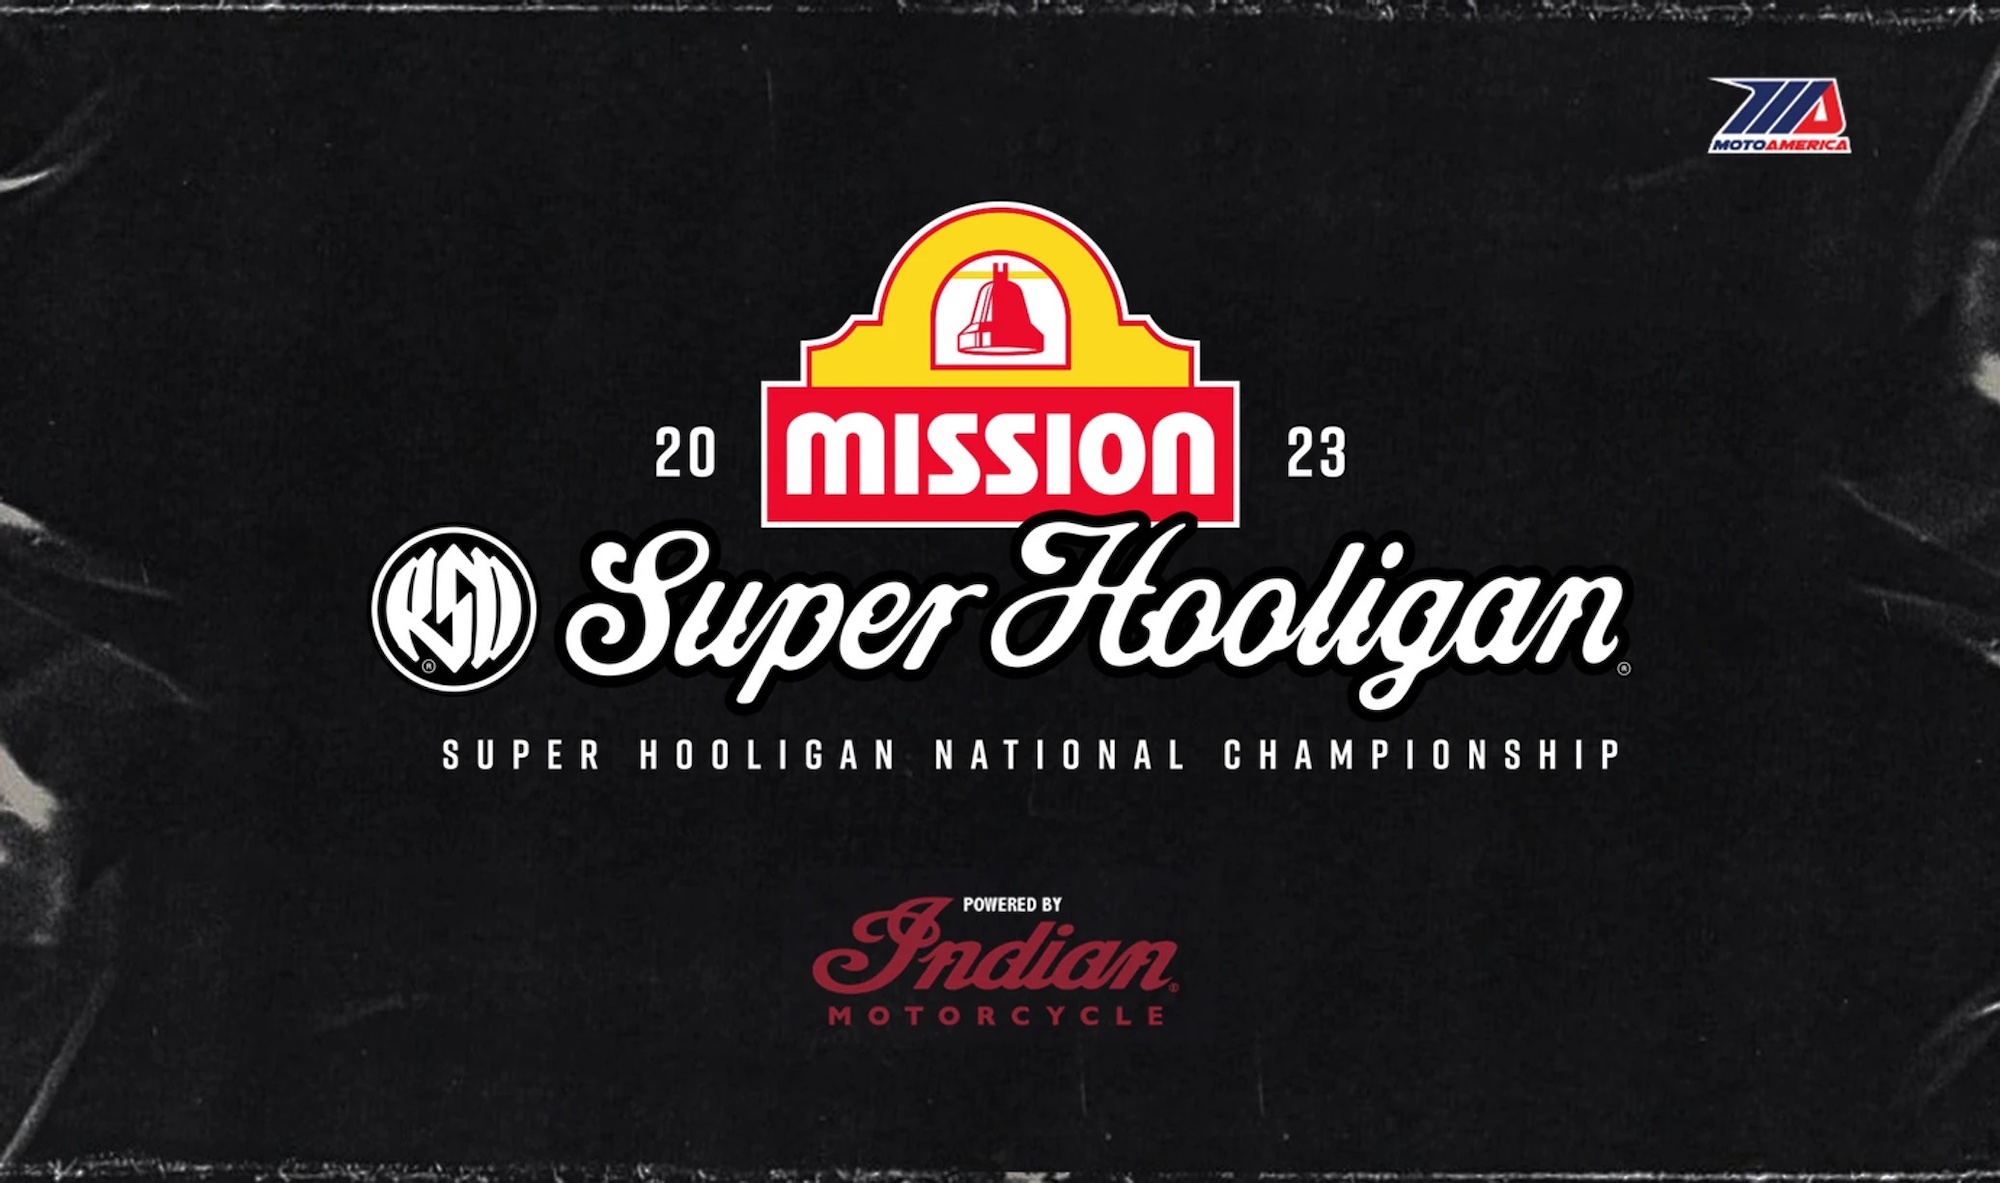 The logo for 2023's Mission Foods Super Hooligan National Championship. Media sourced from Super Hooligan.